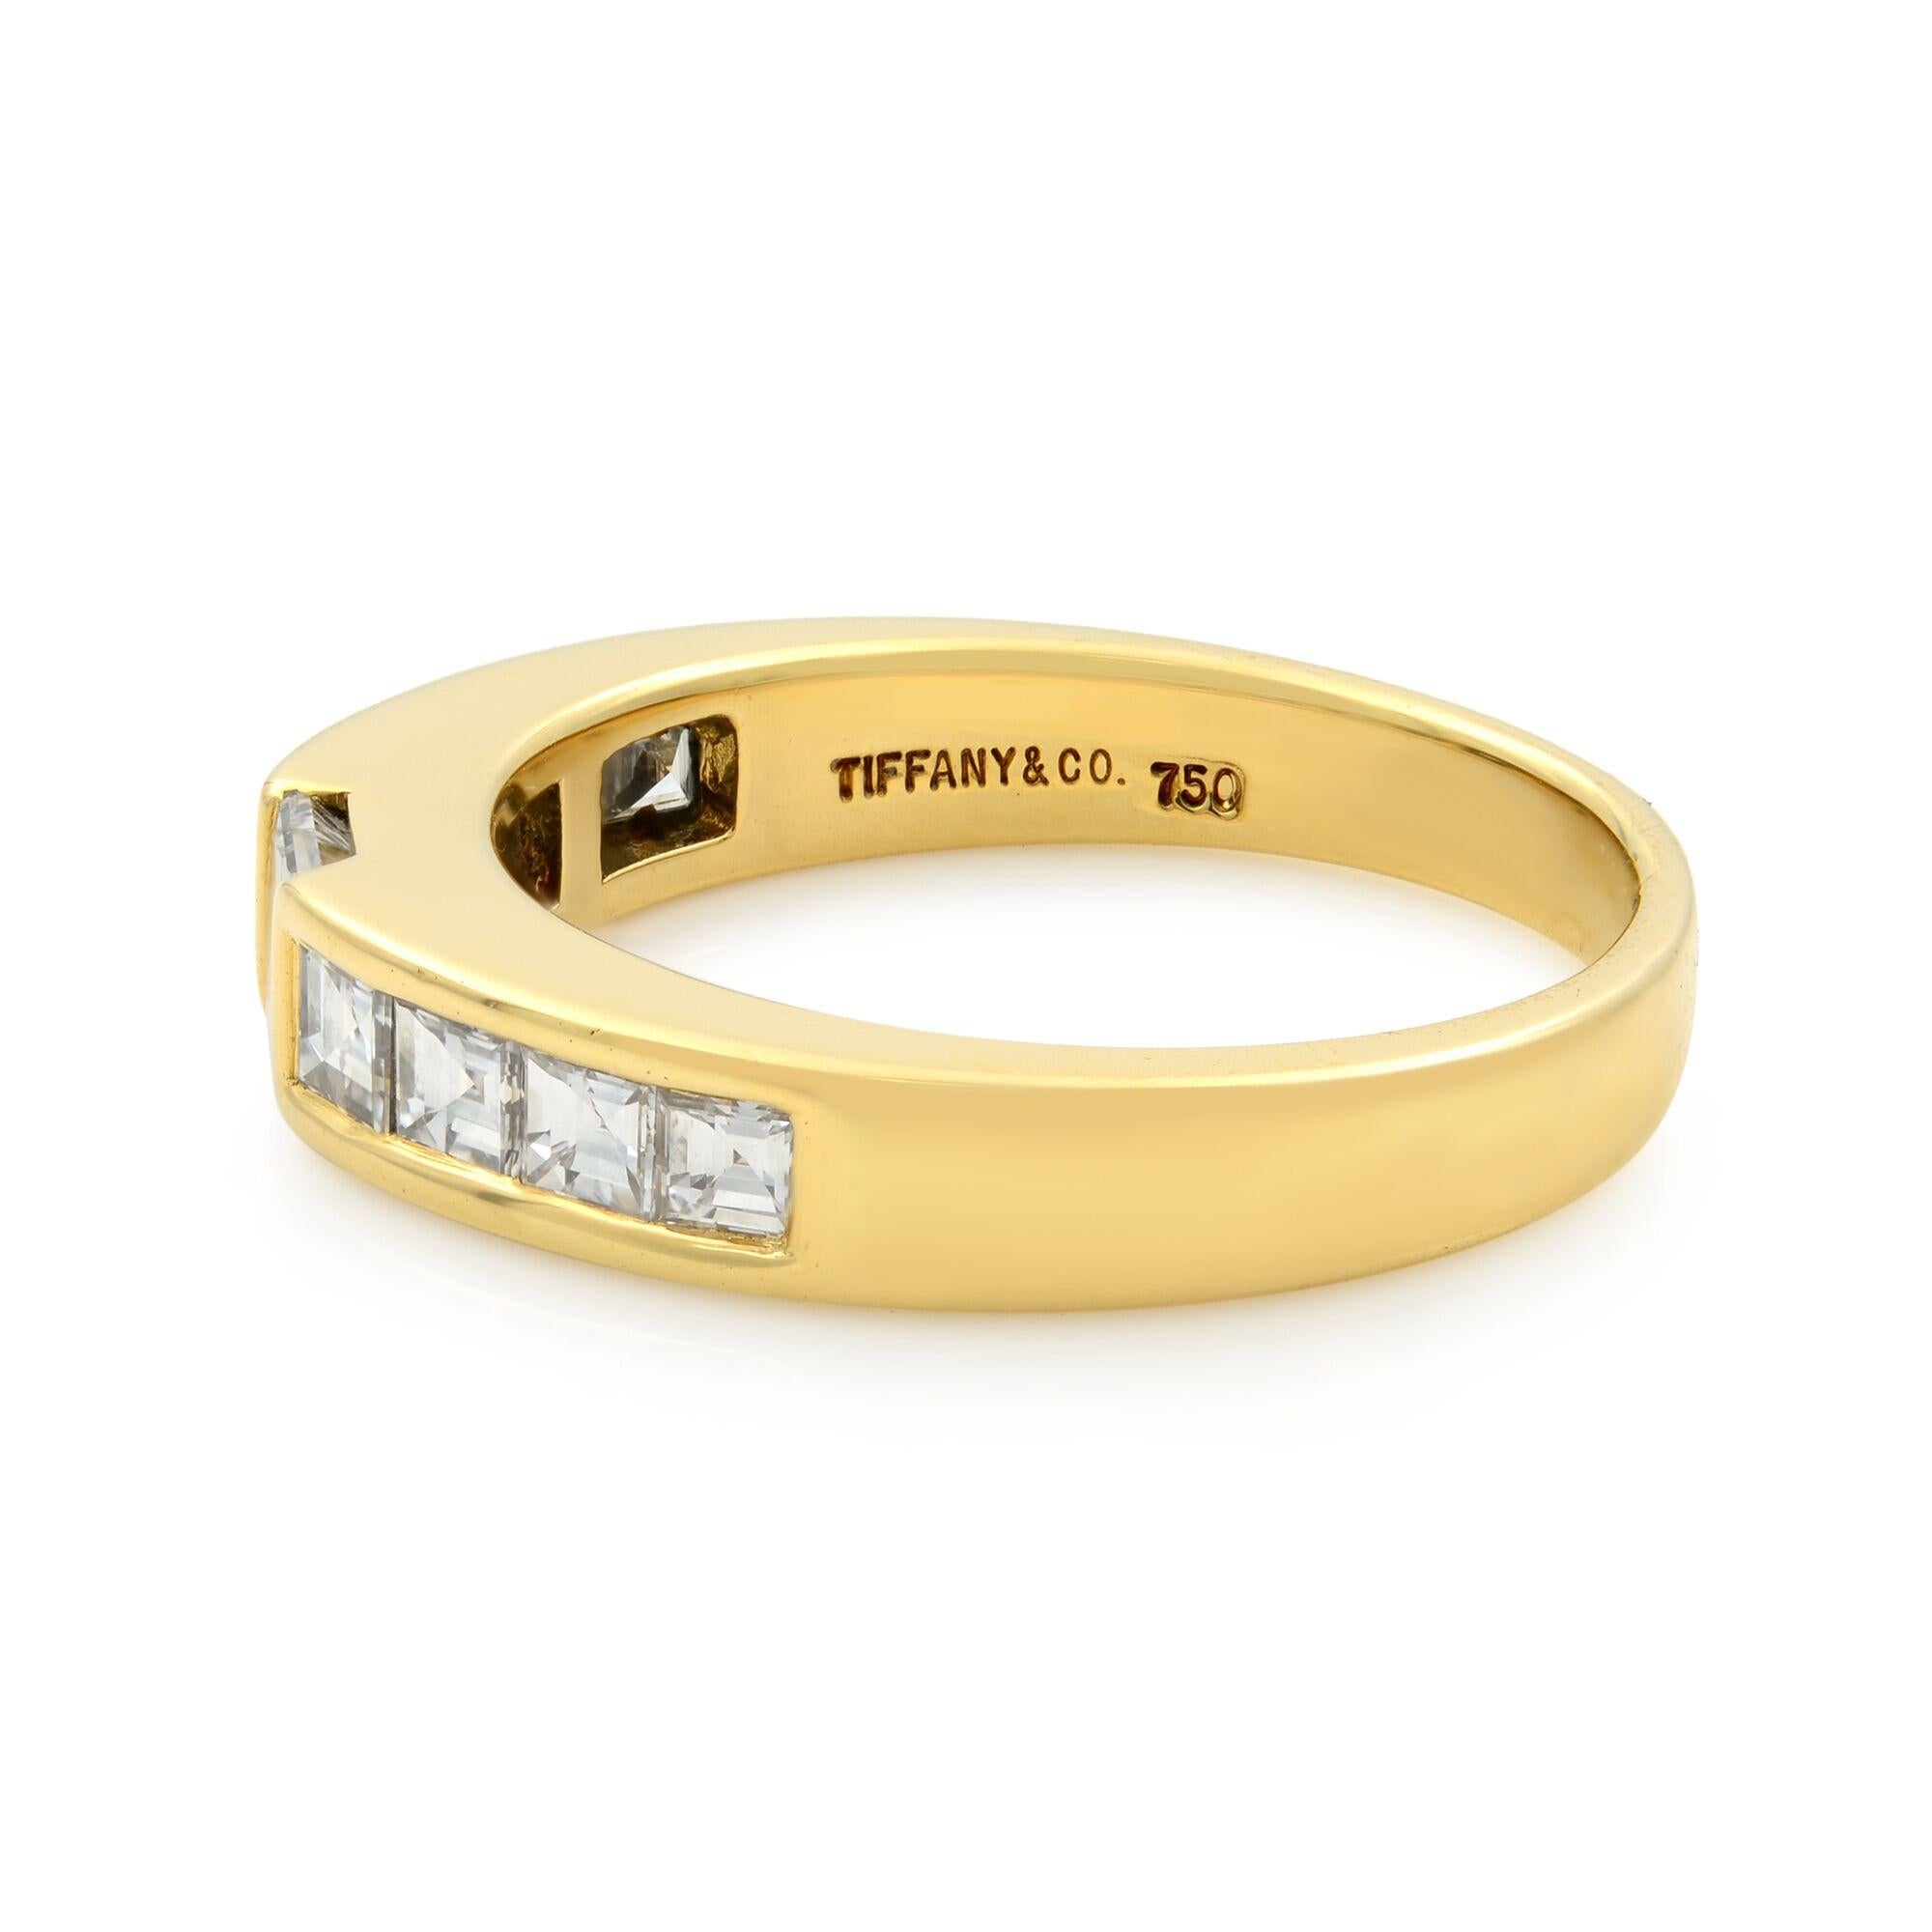 This lovely vintage stack band ring from Tiffany & Co is crafted from solid 18k yellow gold in a fine polished finish. Channel set with 9 princess cut diamonds. Center stone weights 0.29cts and side stones are 0.48cts. Diamond color F-G and VS